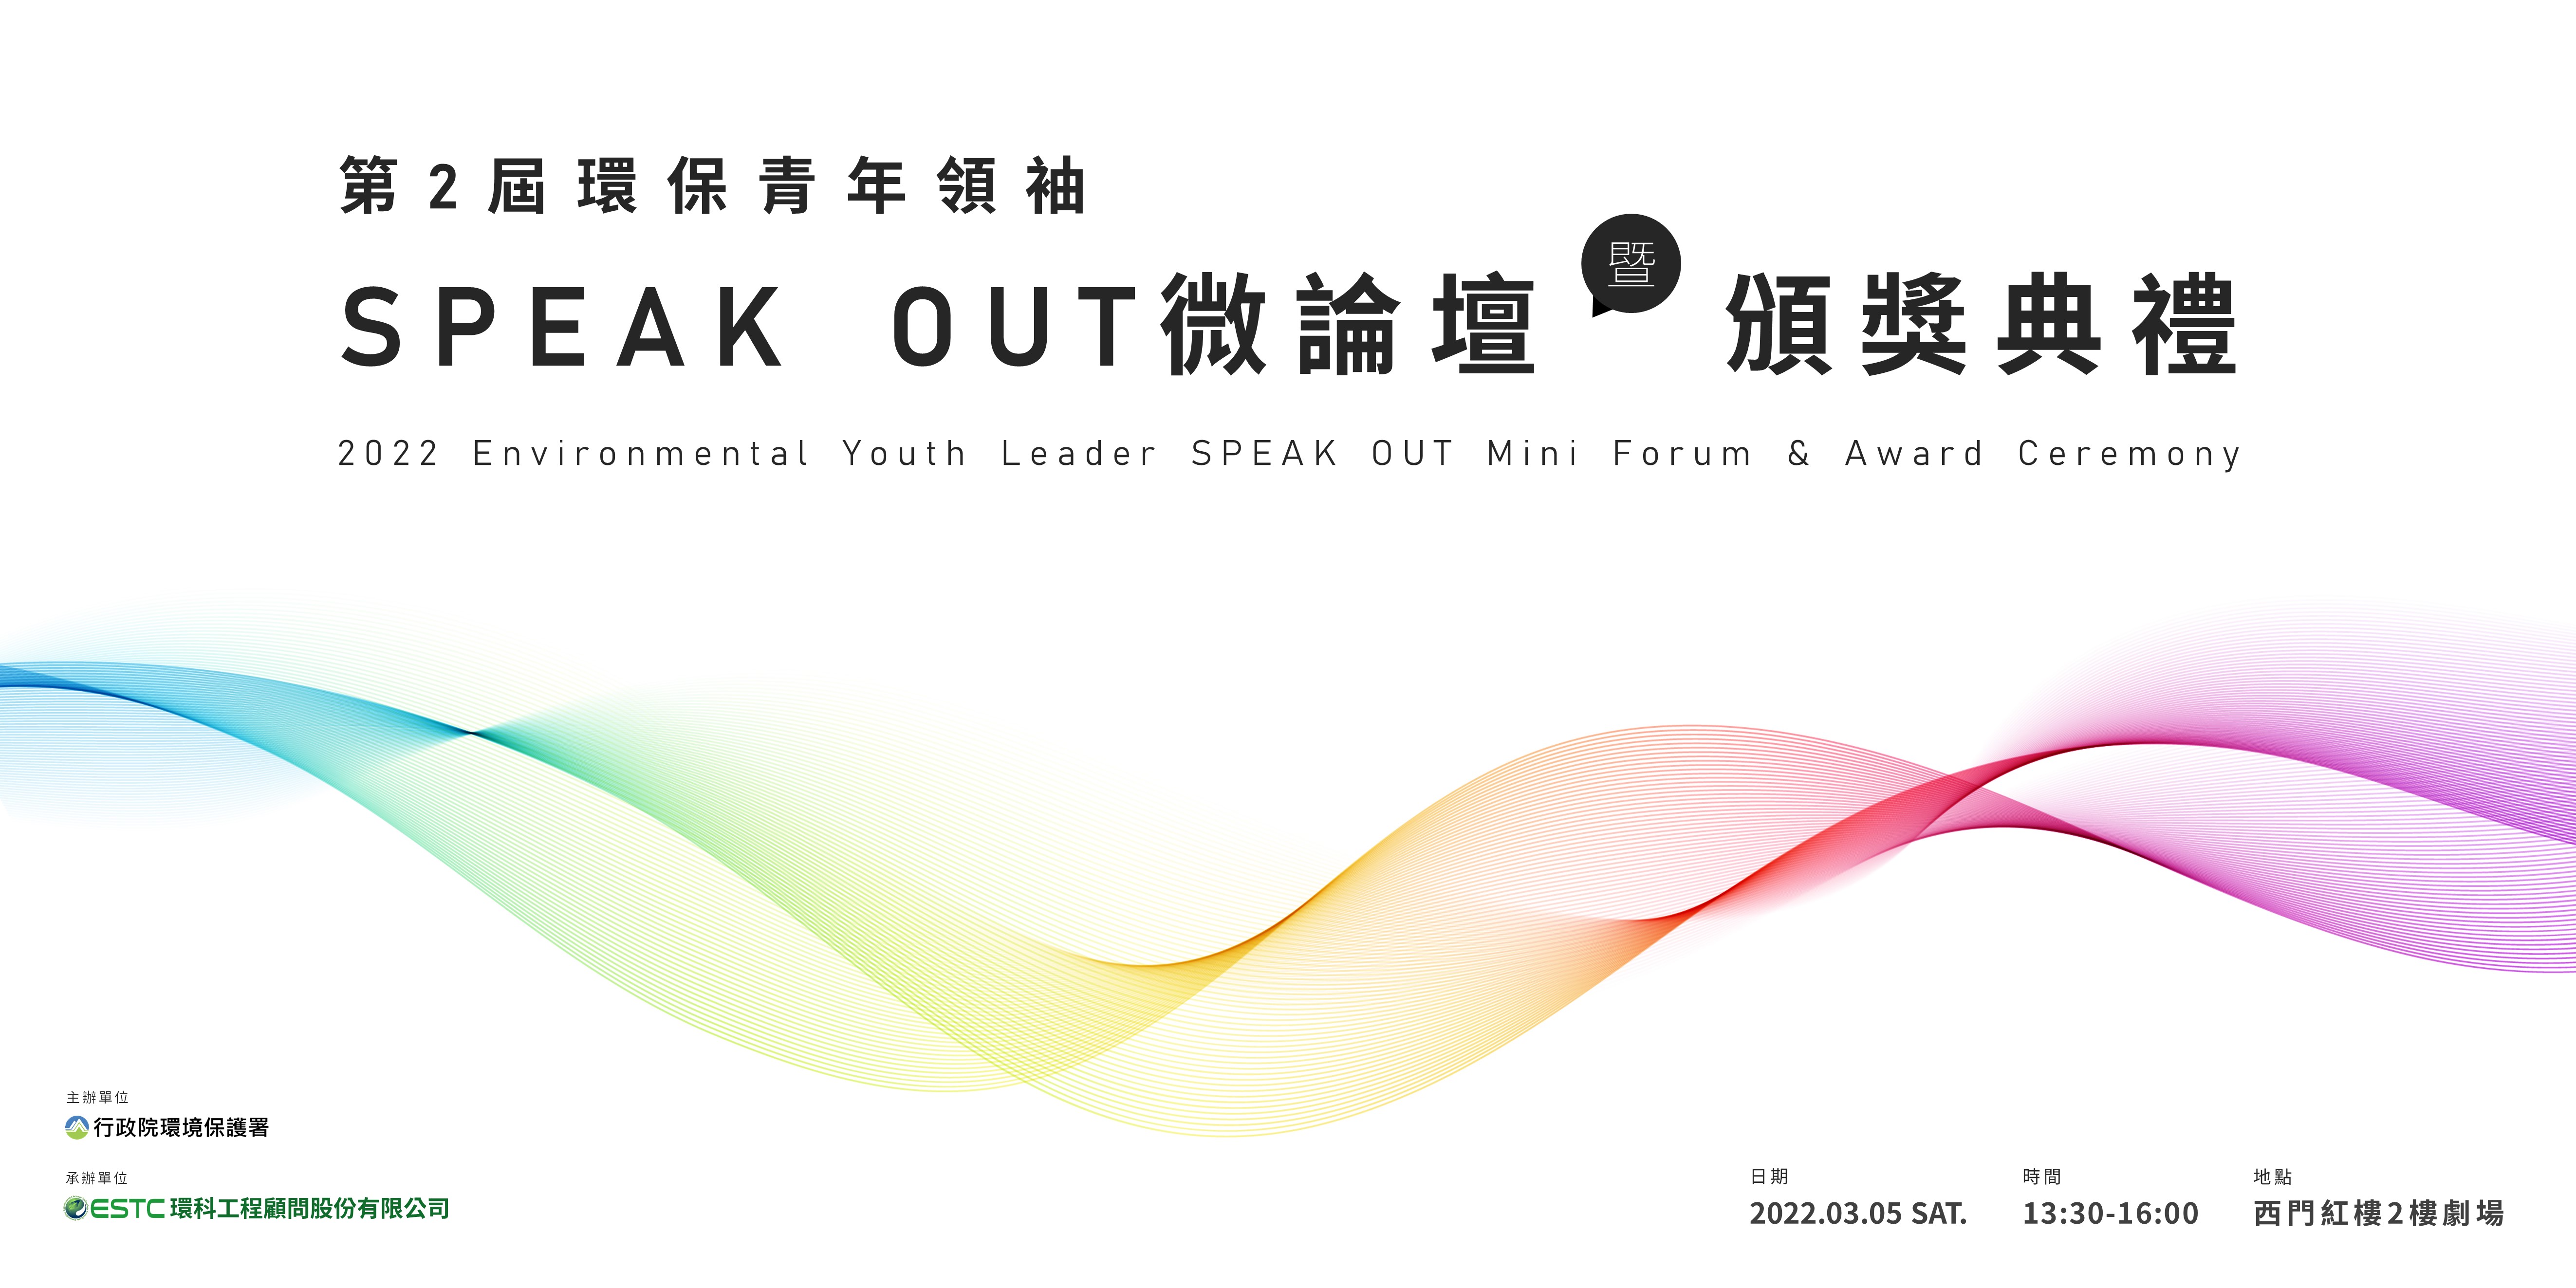 2022 Environmental Youth Leader SPEAK OUT Mini Forum & Award Ceremony